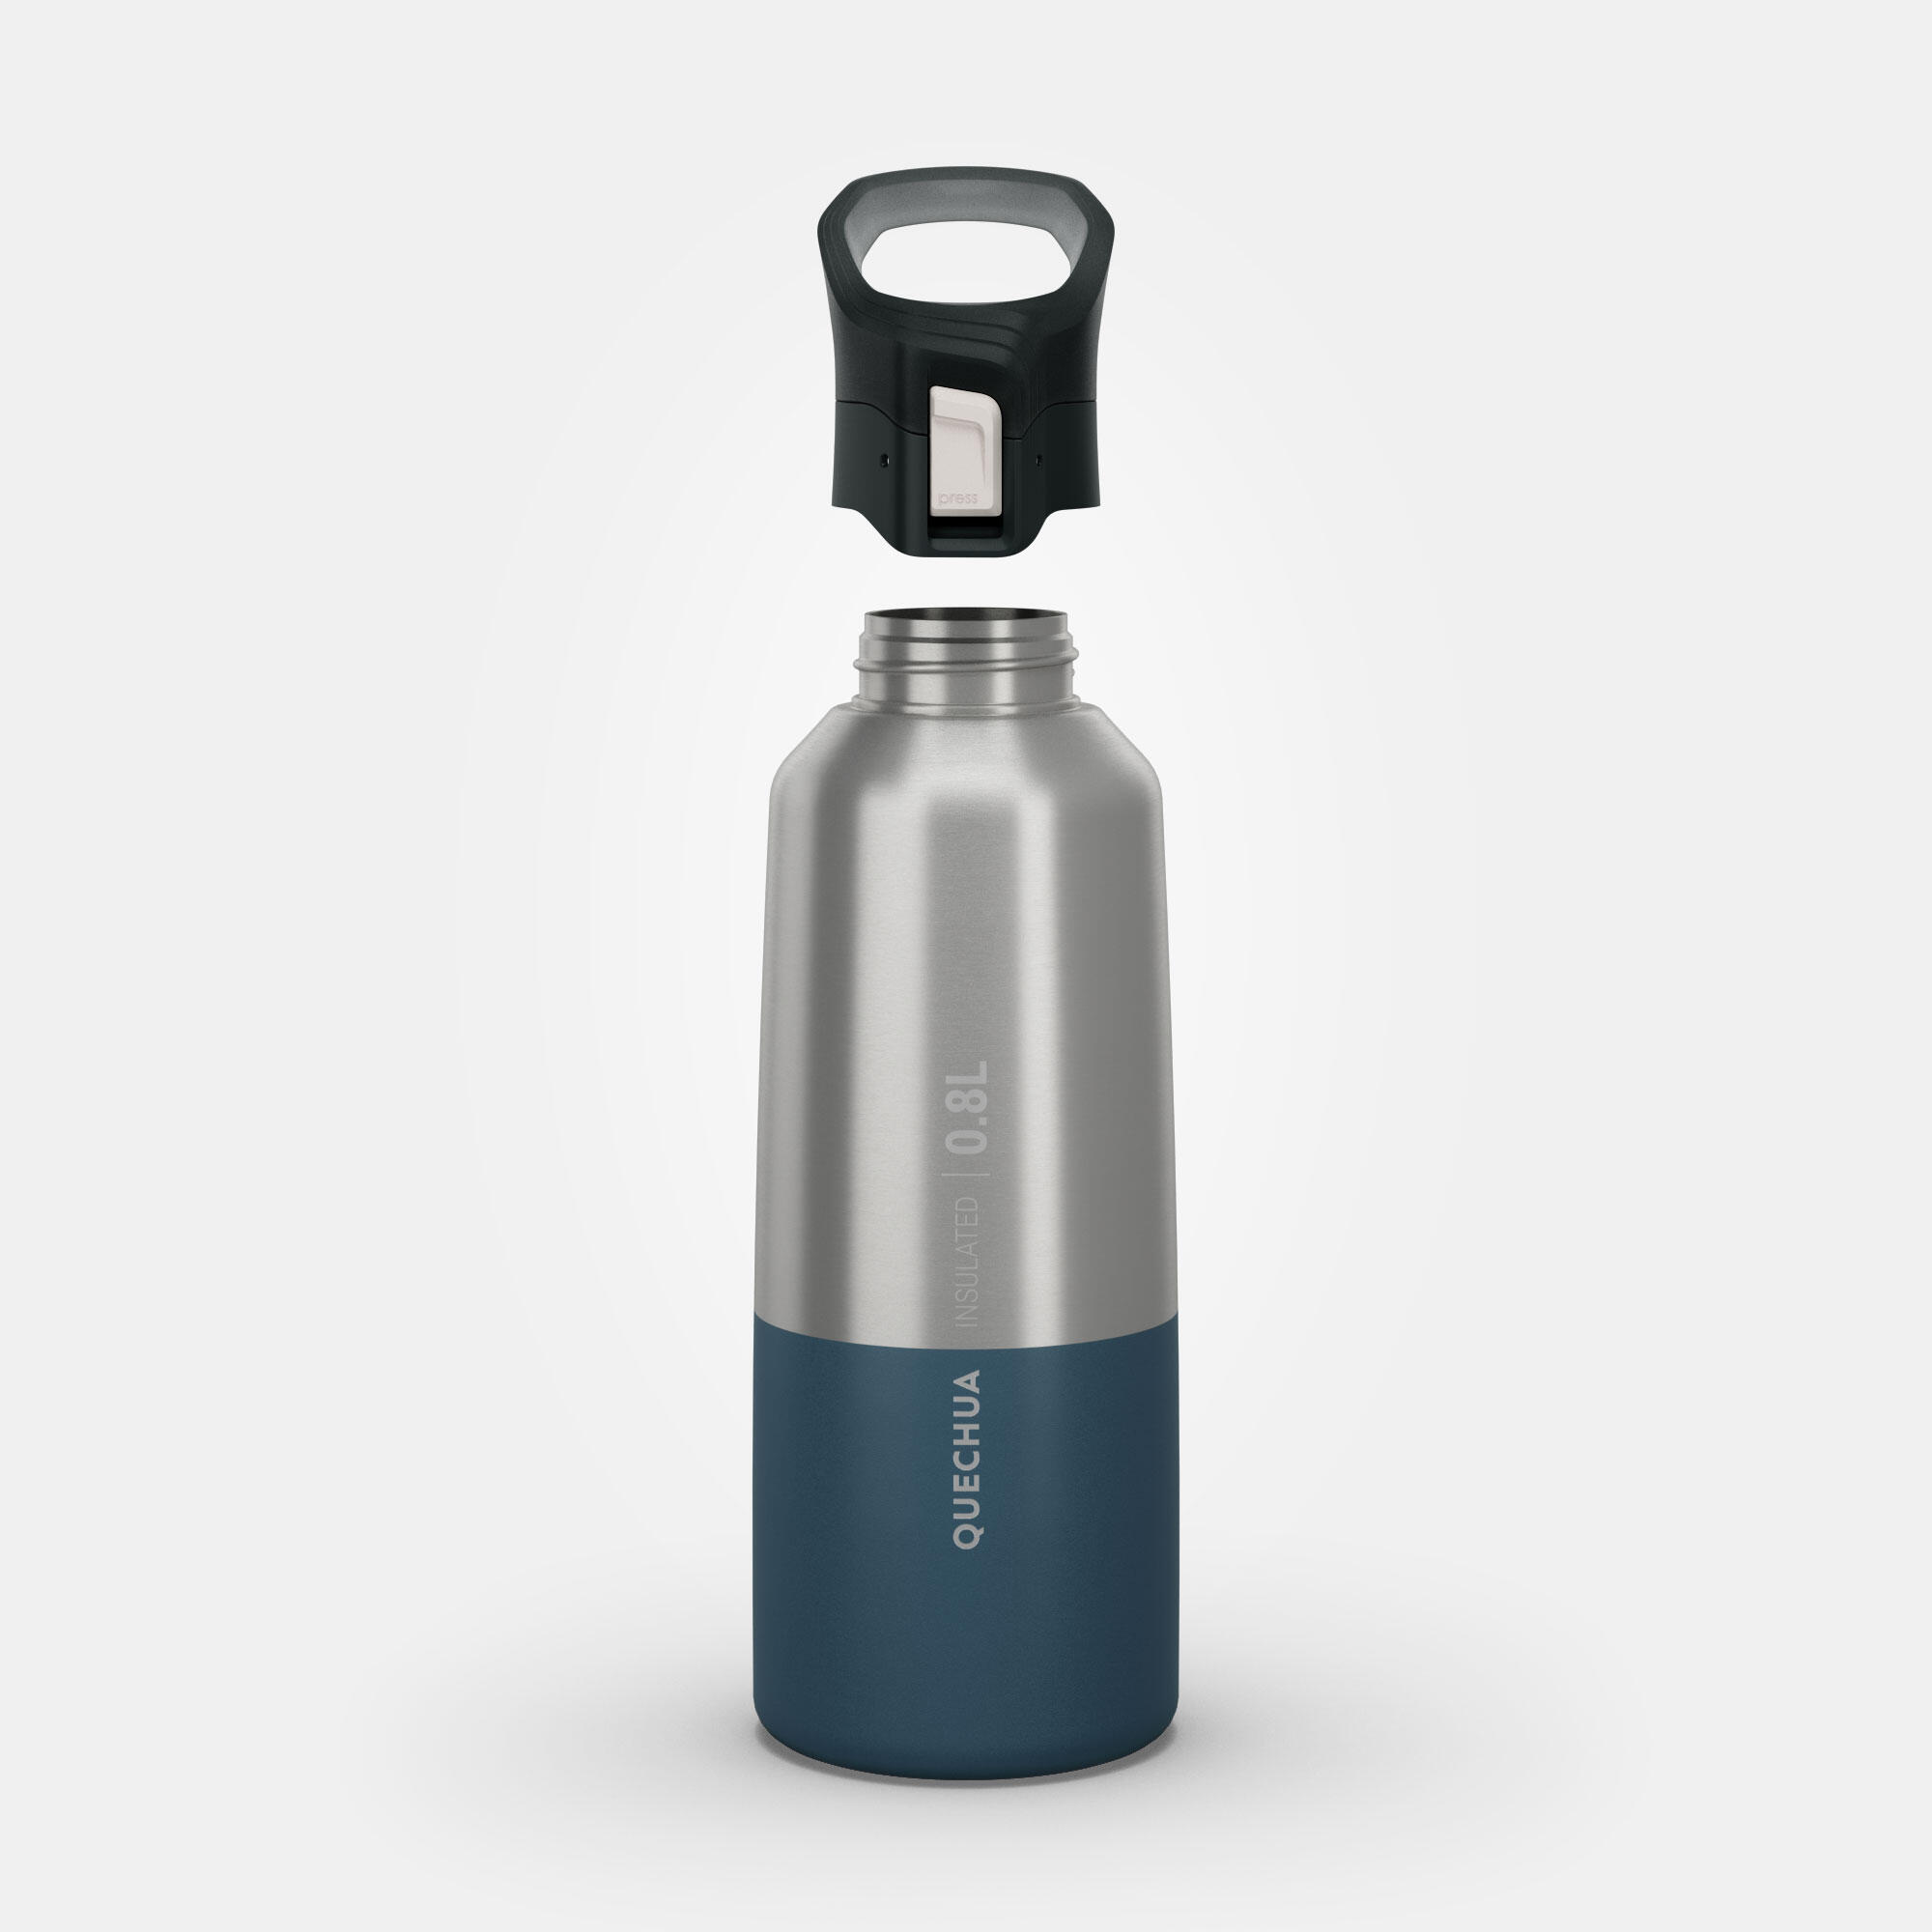 MH500 insulated hiking flask 0.8 L - QUECHUA